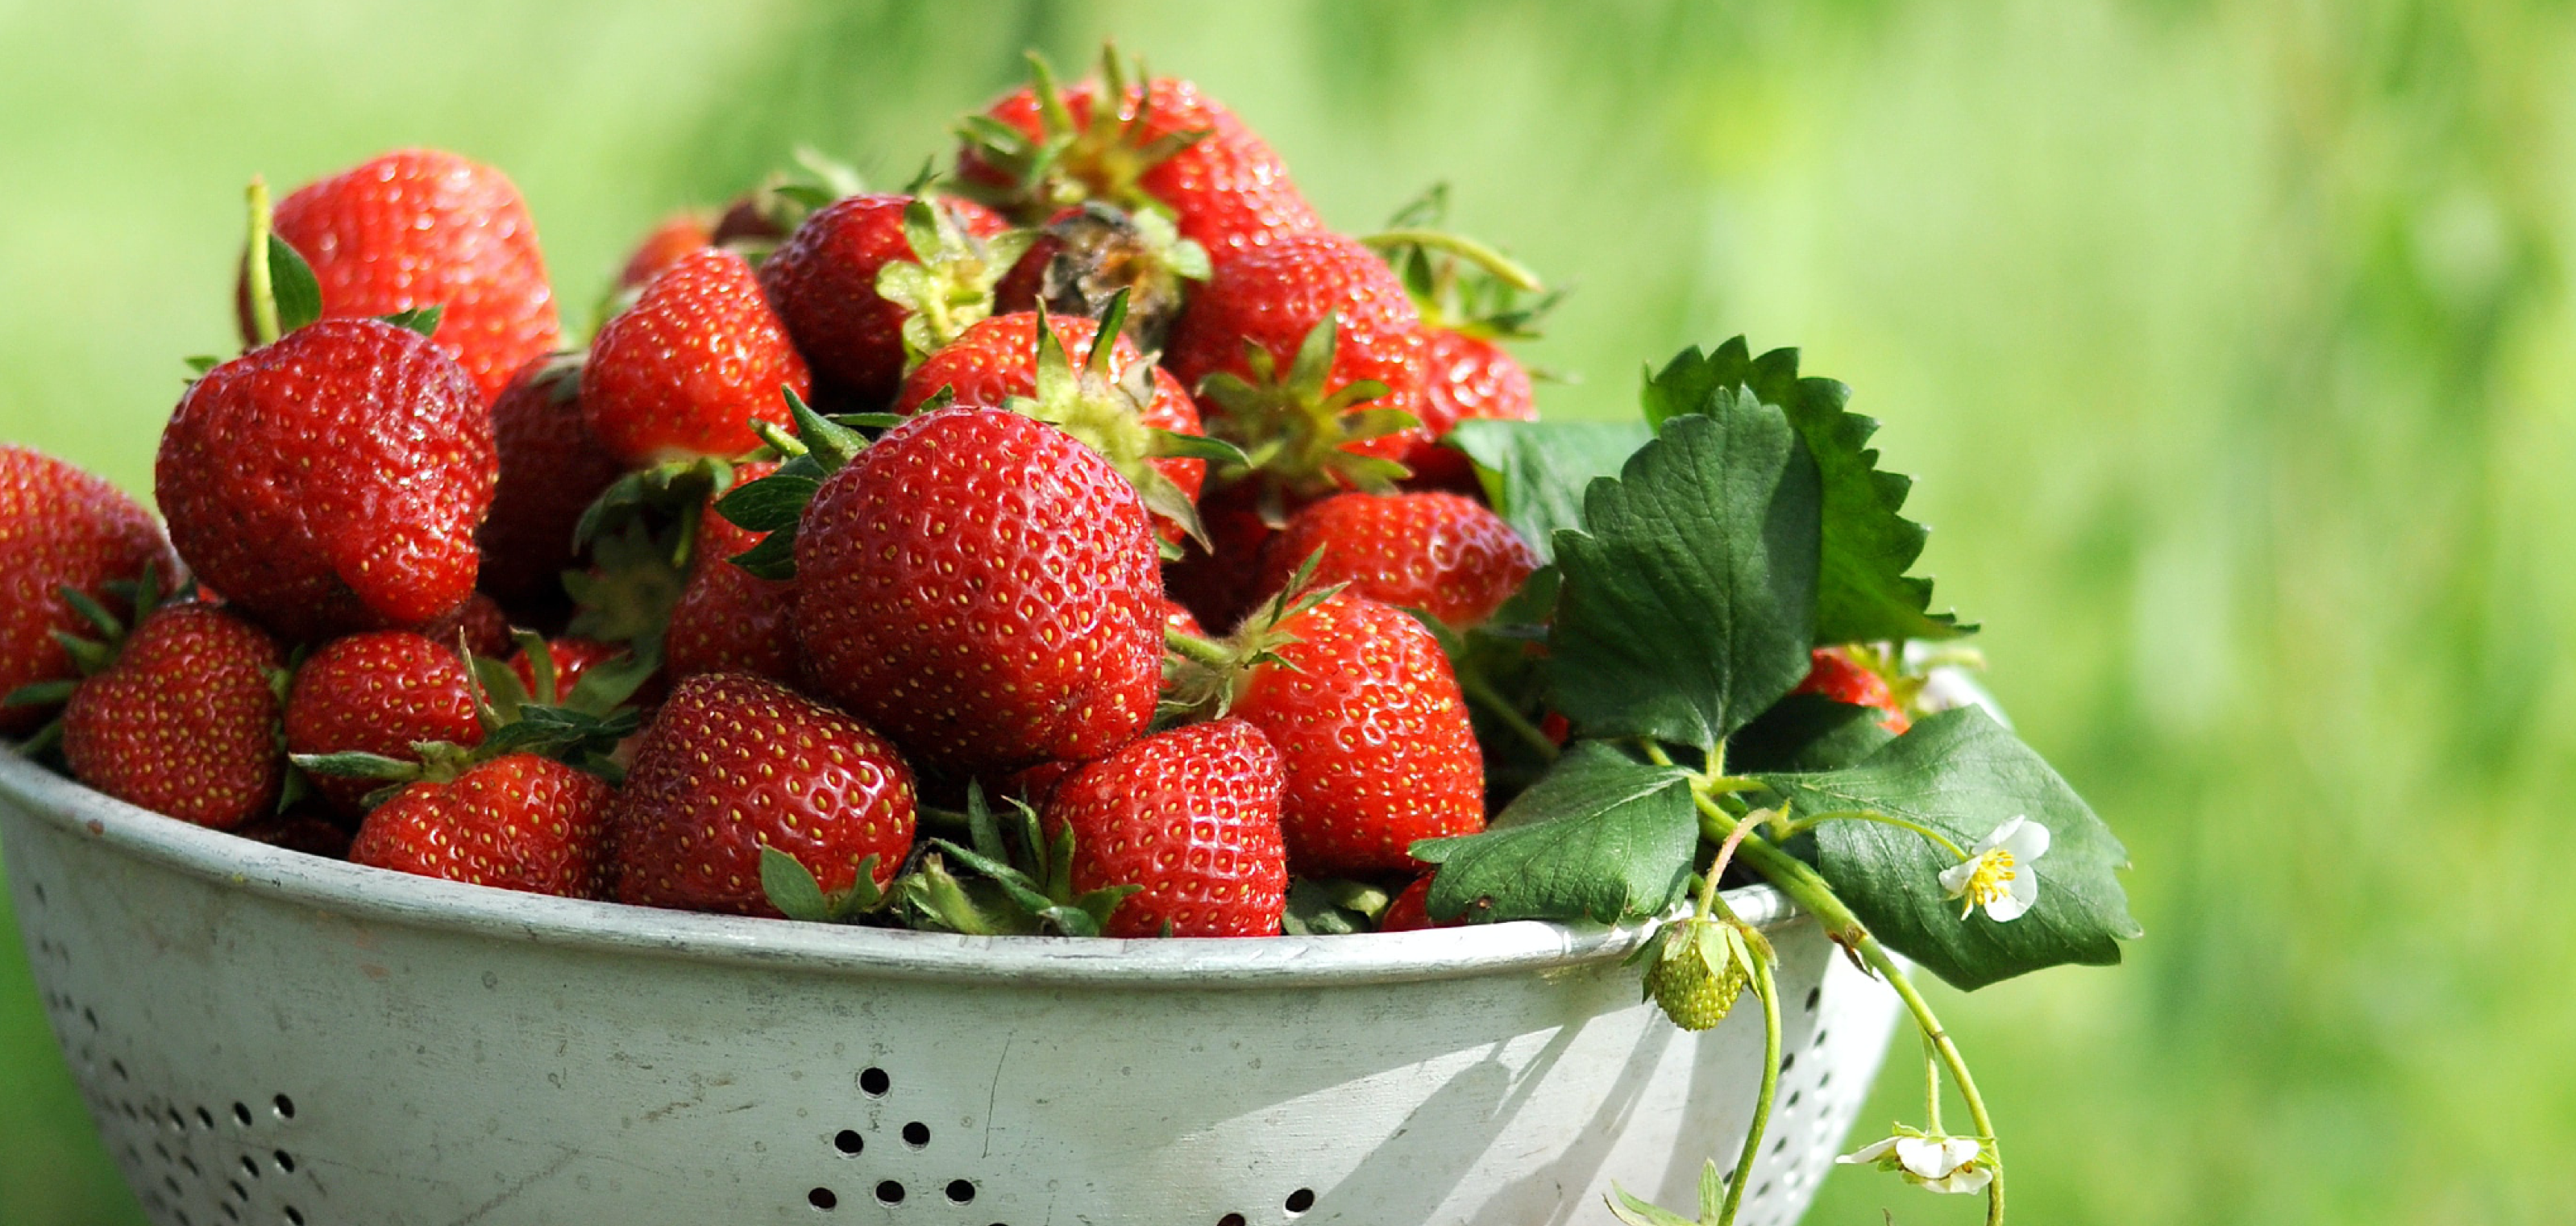 Strawberries in a basket with a green background